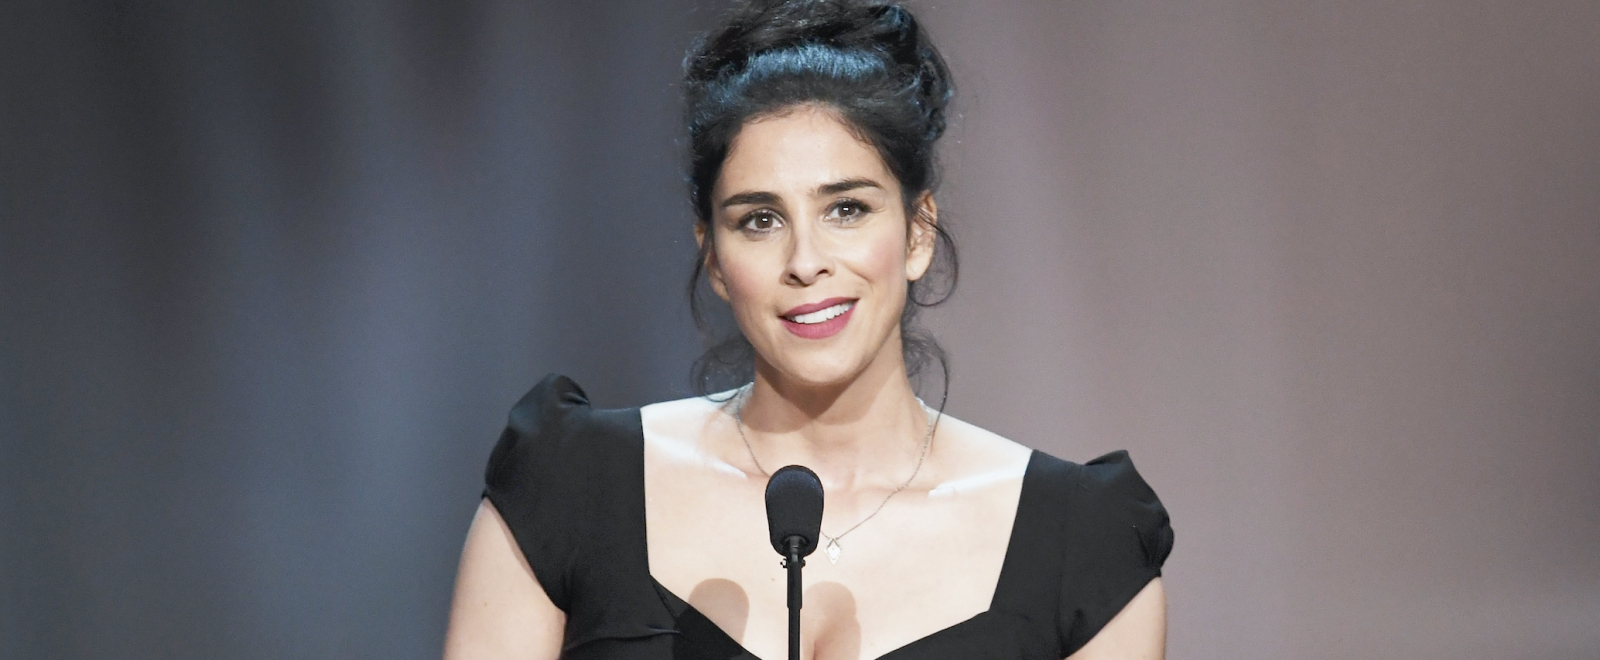 Sarah Silverman Wishes She Could ‘Delete’ The Footage Of Herself Roasting Britney Spears At The VMAs